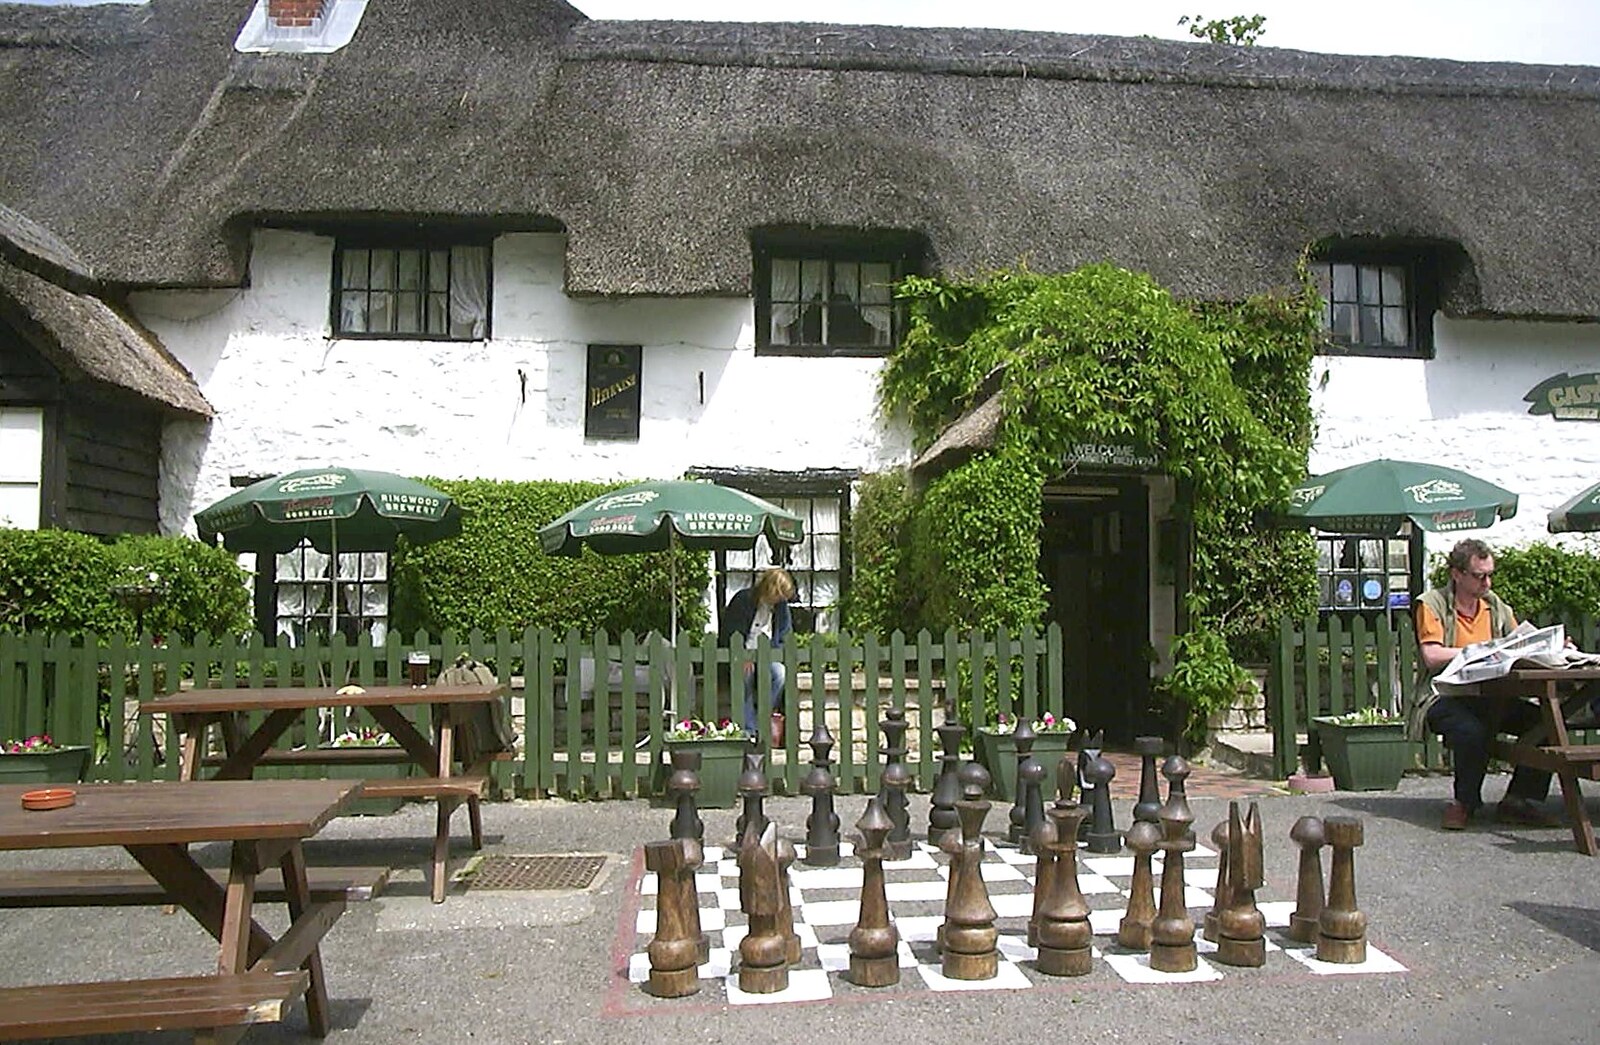 Corfe Castle Camping, Corfe, Dorset - 30th May 2004: A giant chess set outside the Castle Inn, Lulworth